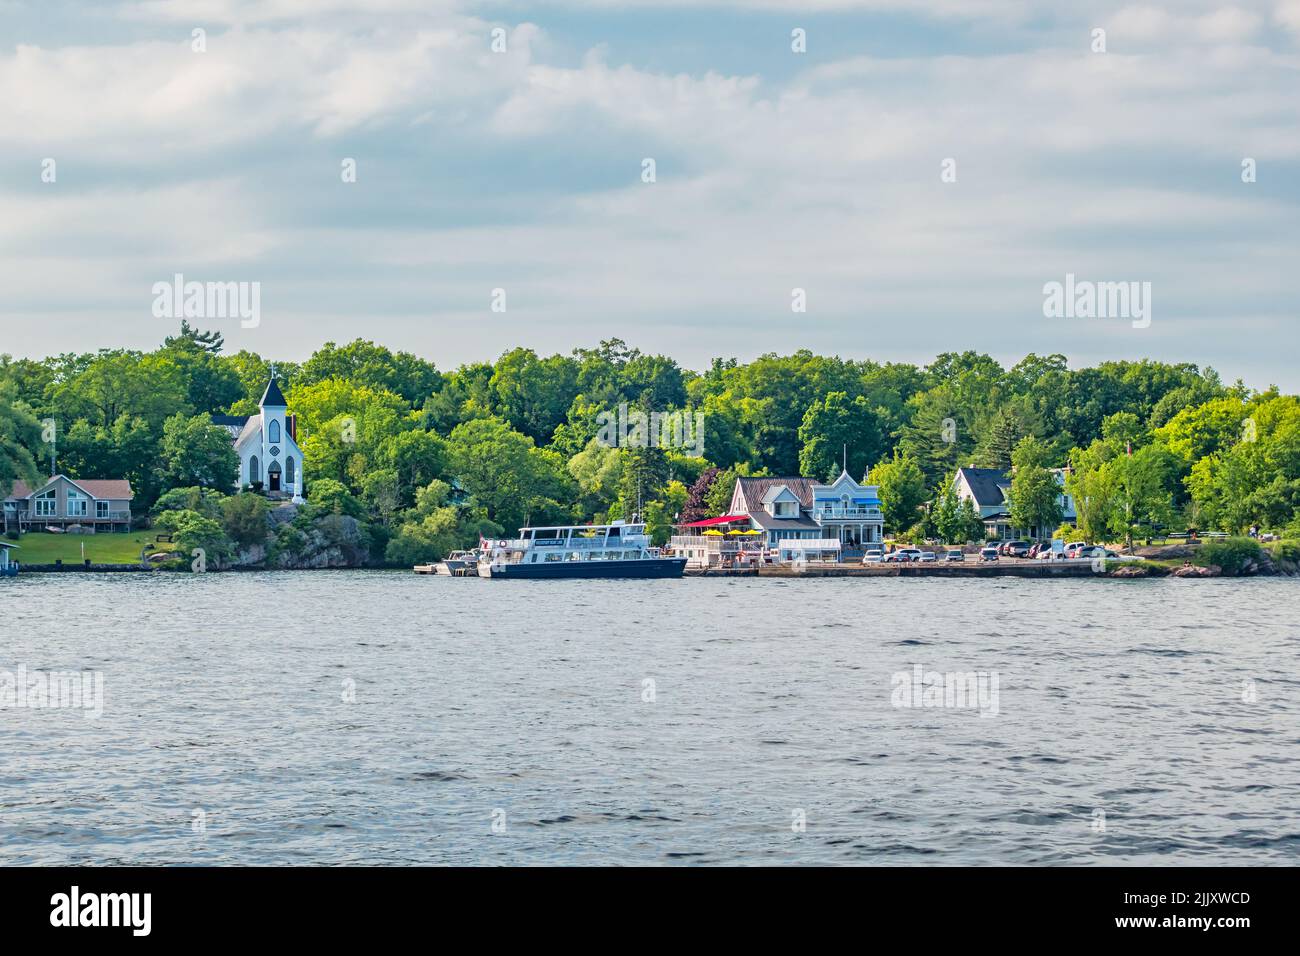 The town of Rockport, Ontario, Canada Stock Photo